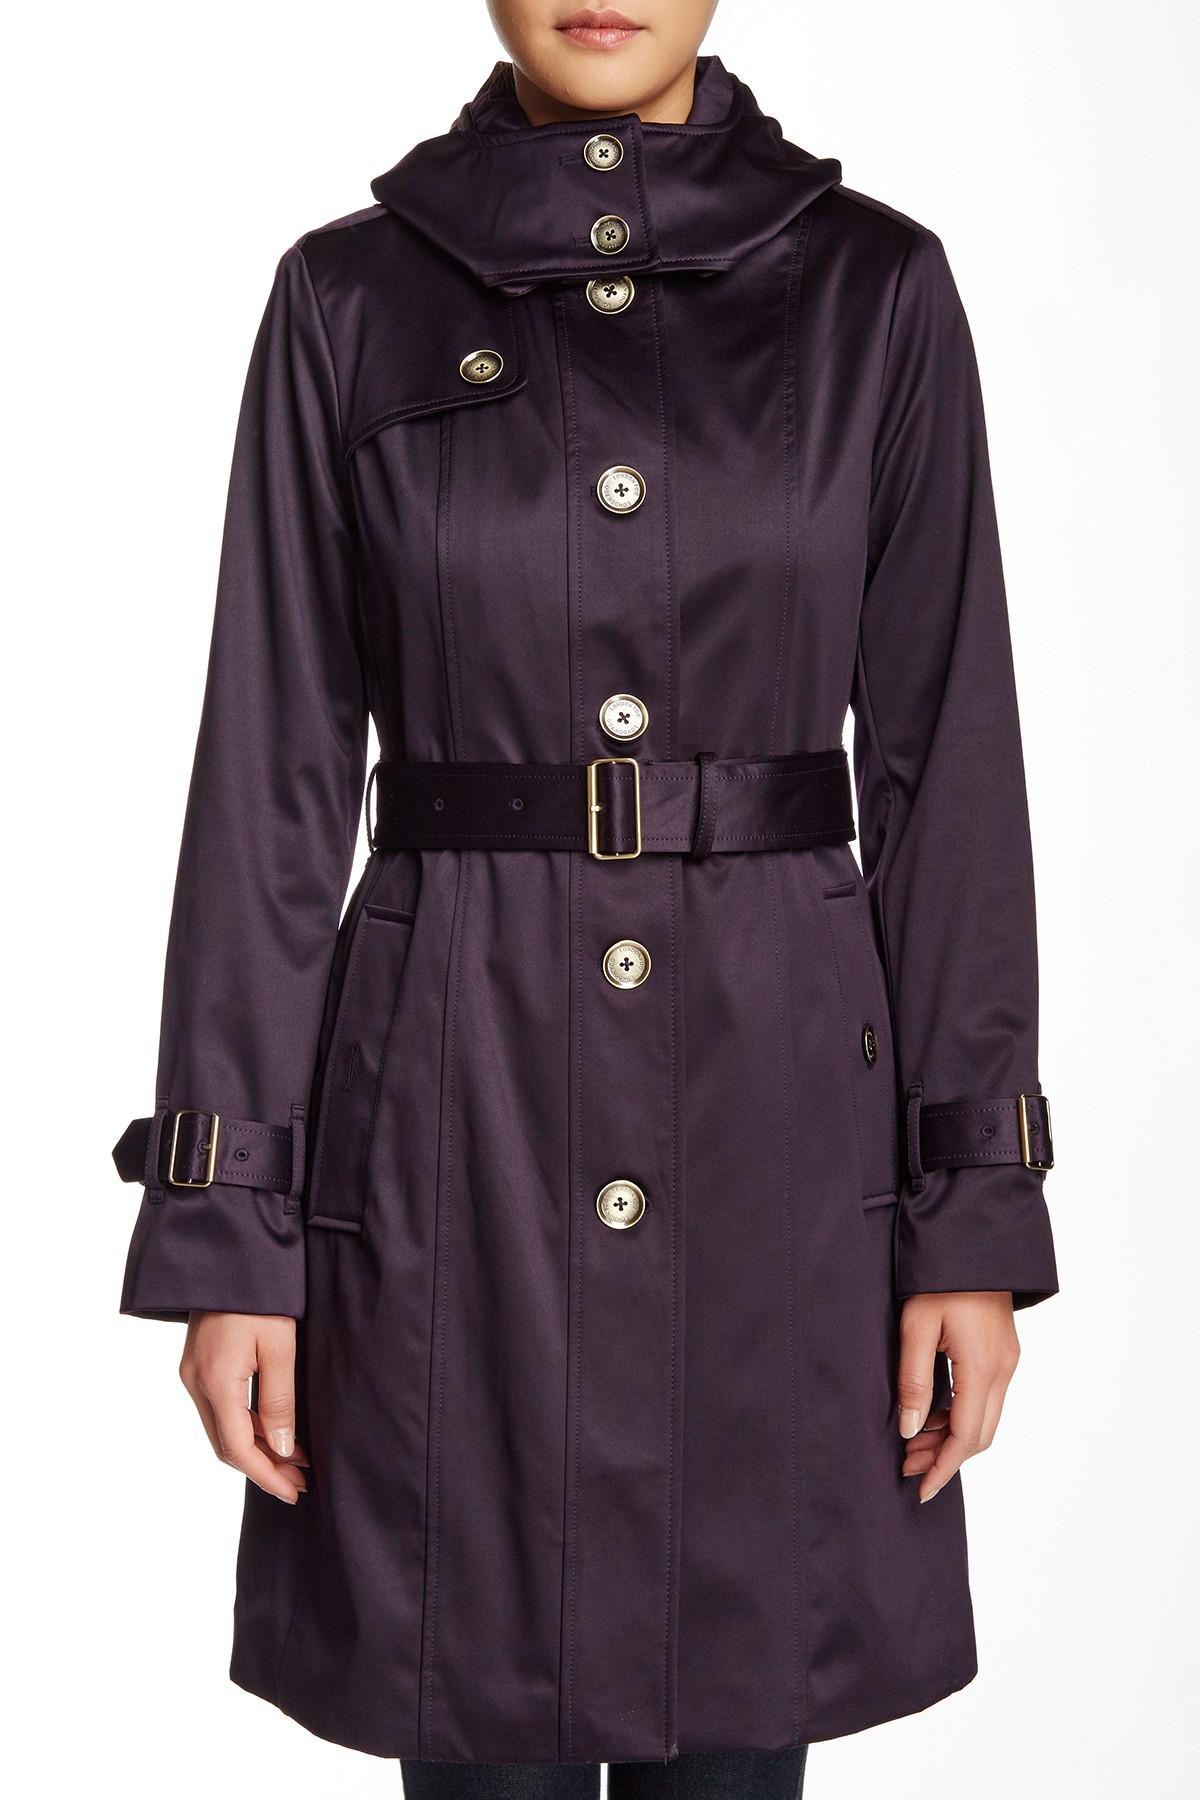 London Fog Cotton Water Repellent Hooded Trench Coat in Purple - Lyst